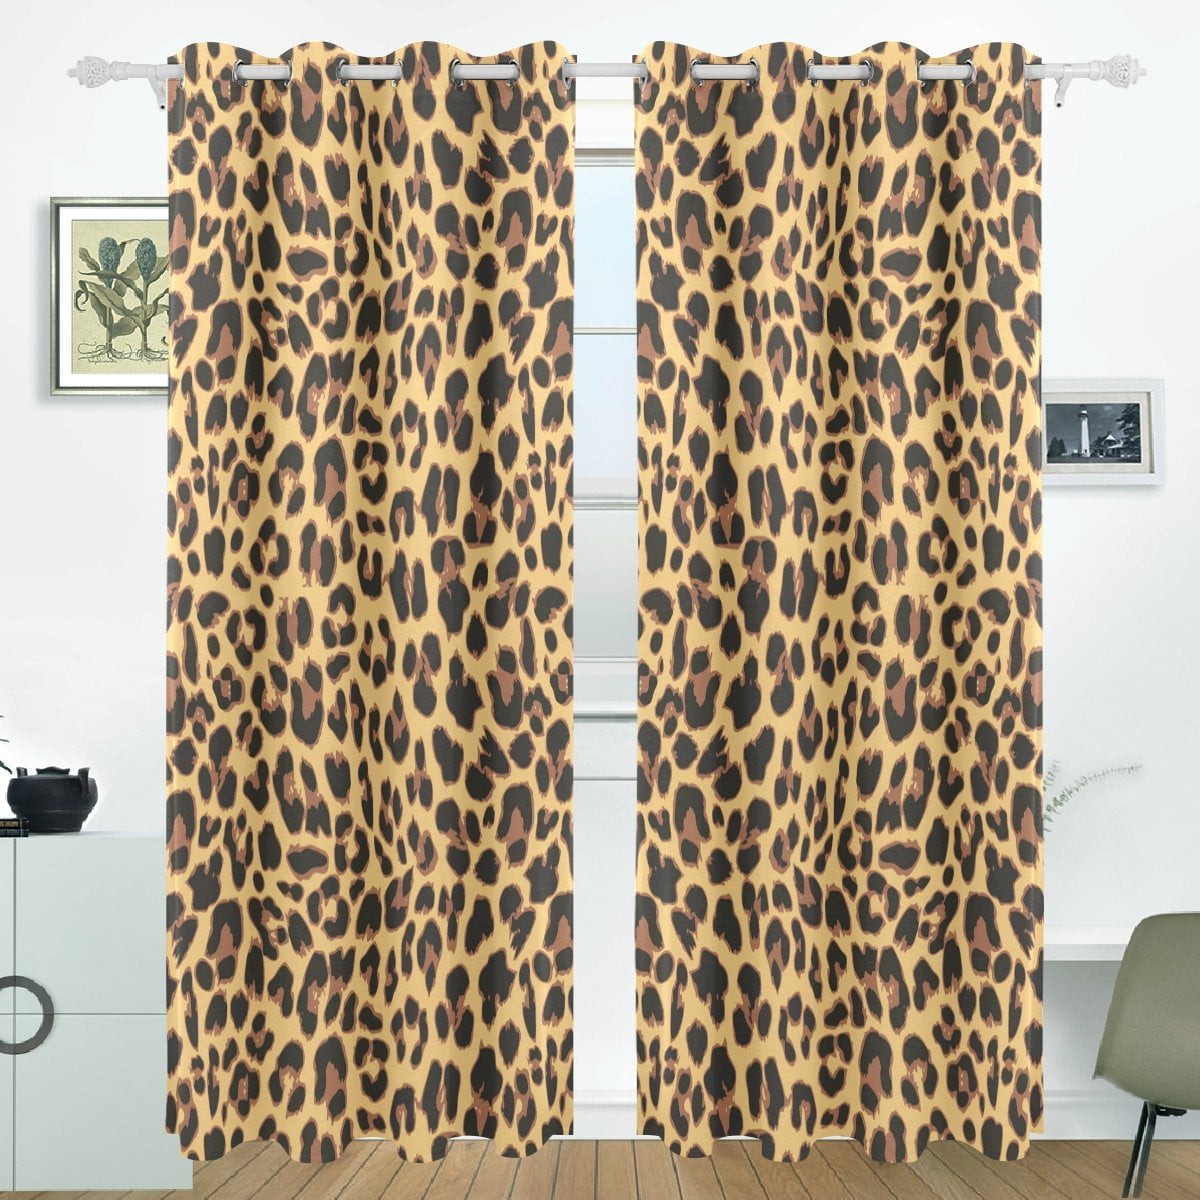 2 Panel 3D Widow Curtains Animal Printed Drapes for Bedroom Room Dividers 